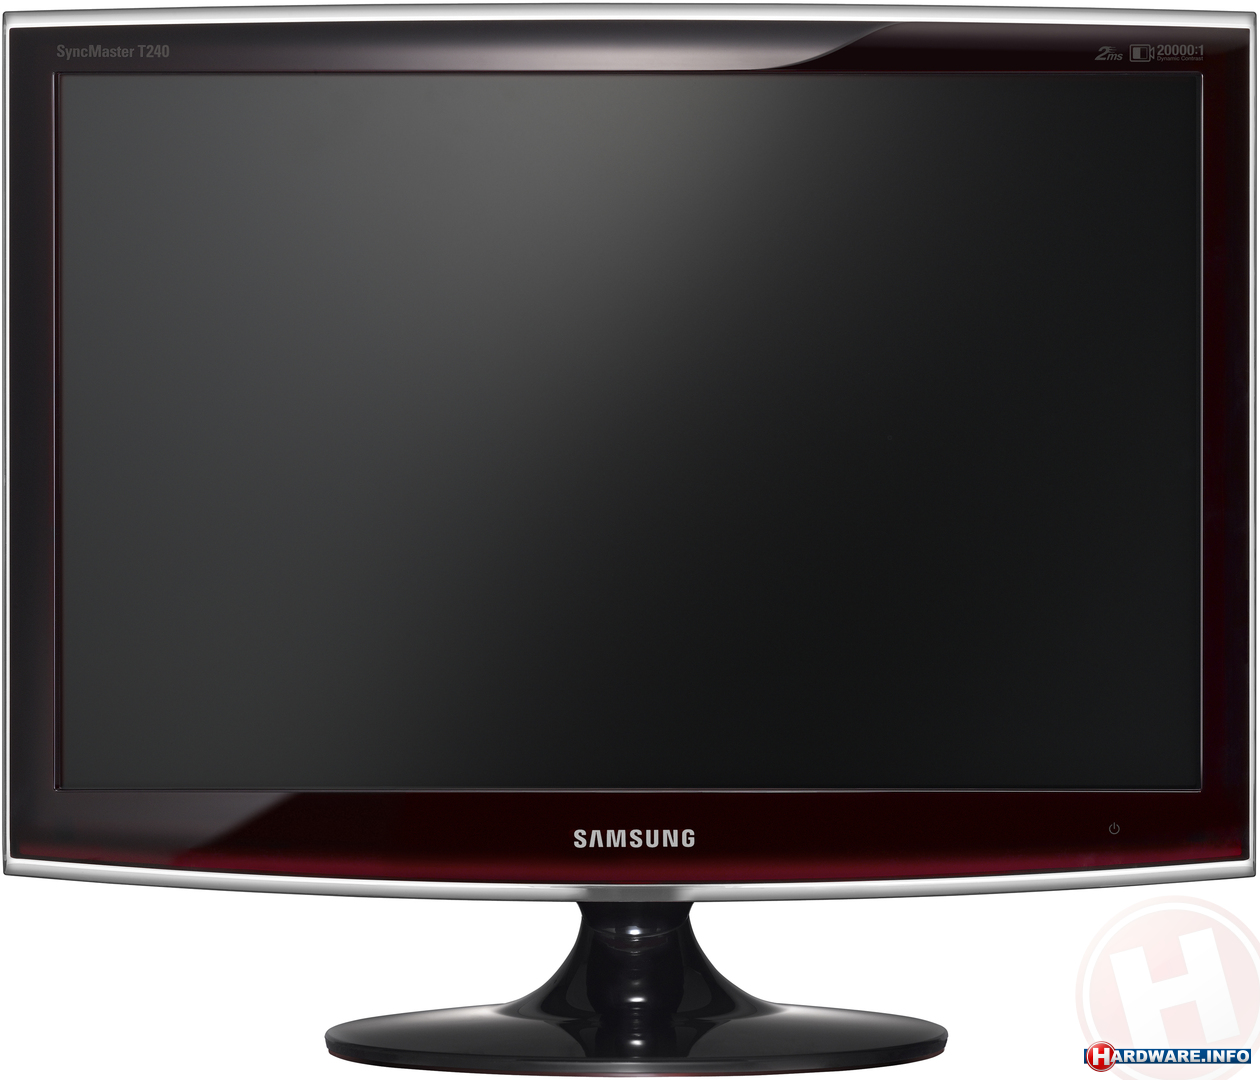 SAMSUNG Sync Master T240 limited edition  large image 1